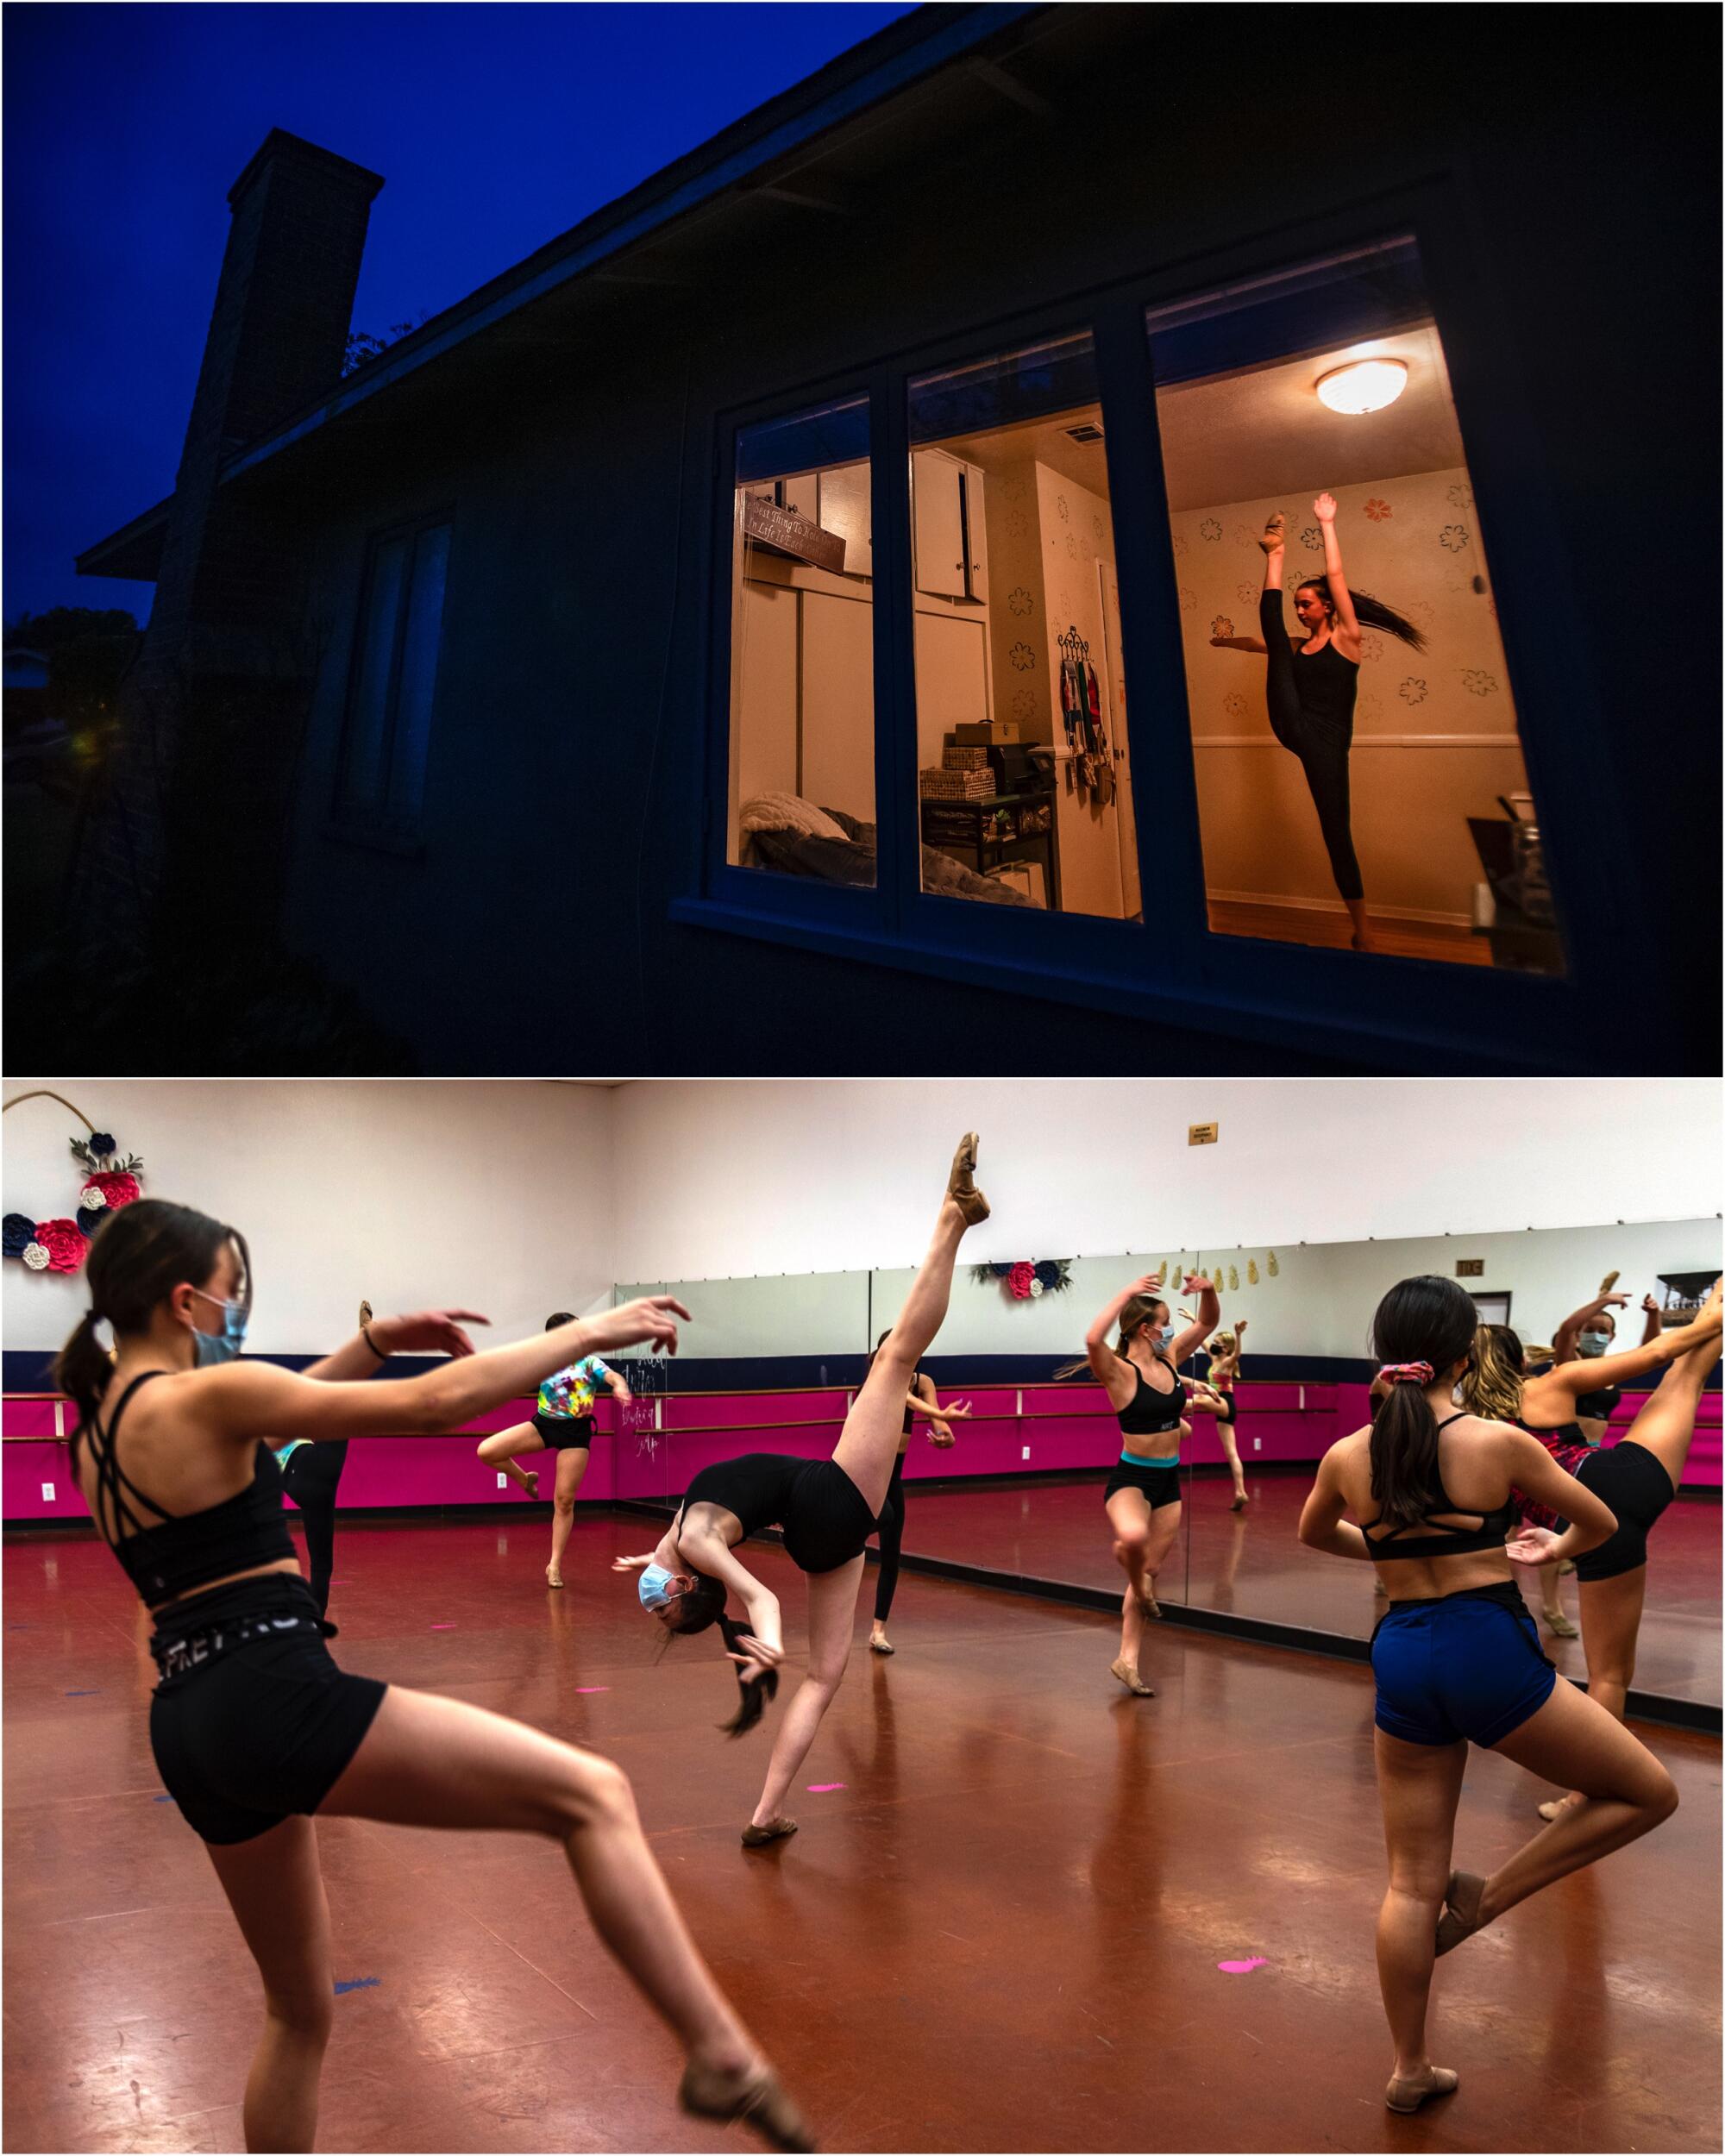 Top and bottom images: a girl in her bedroom dancing and girls in a dance class.